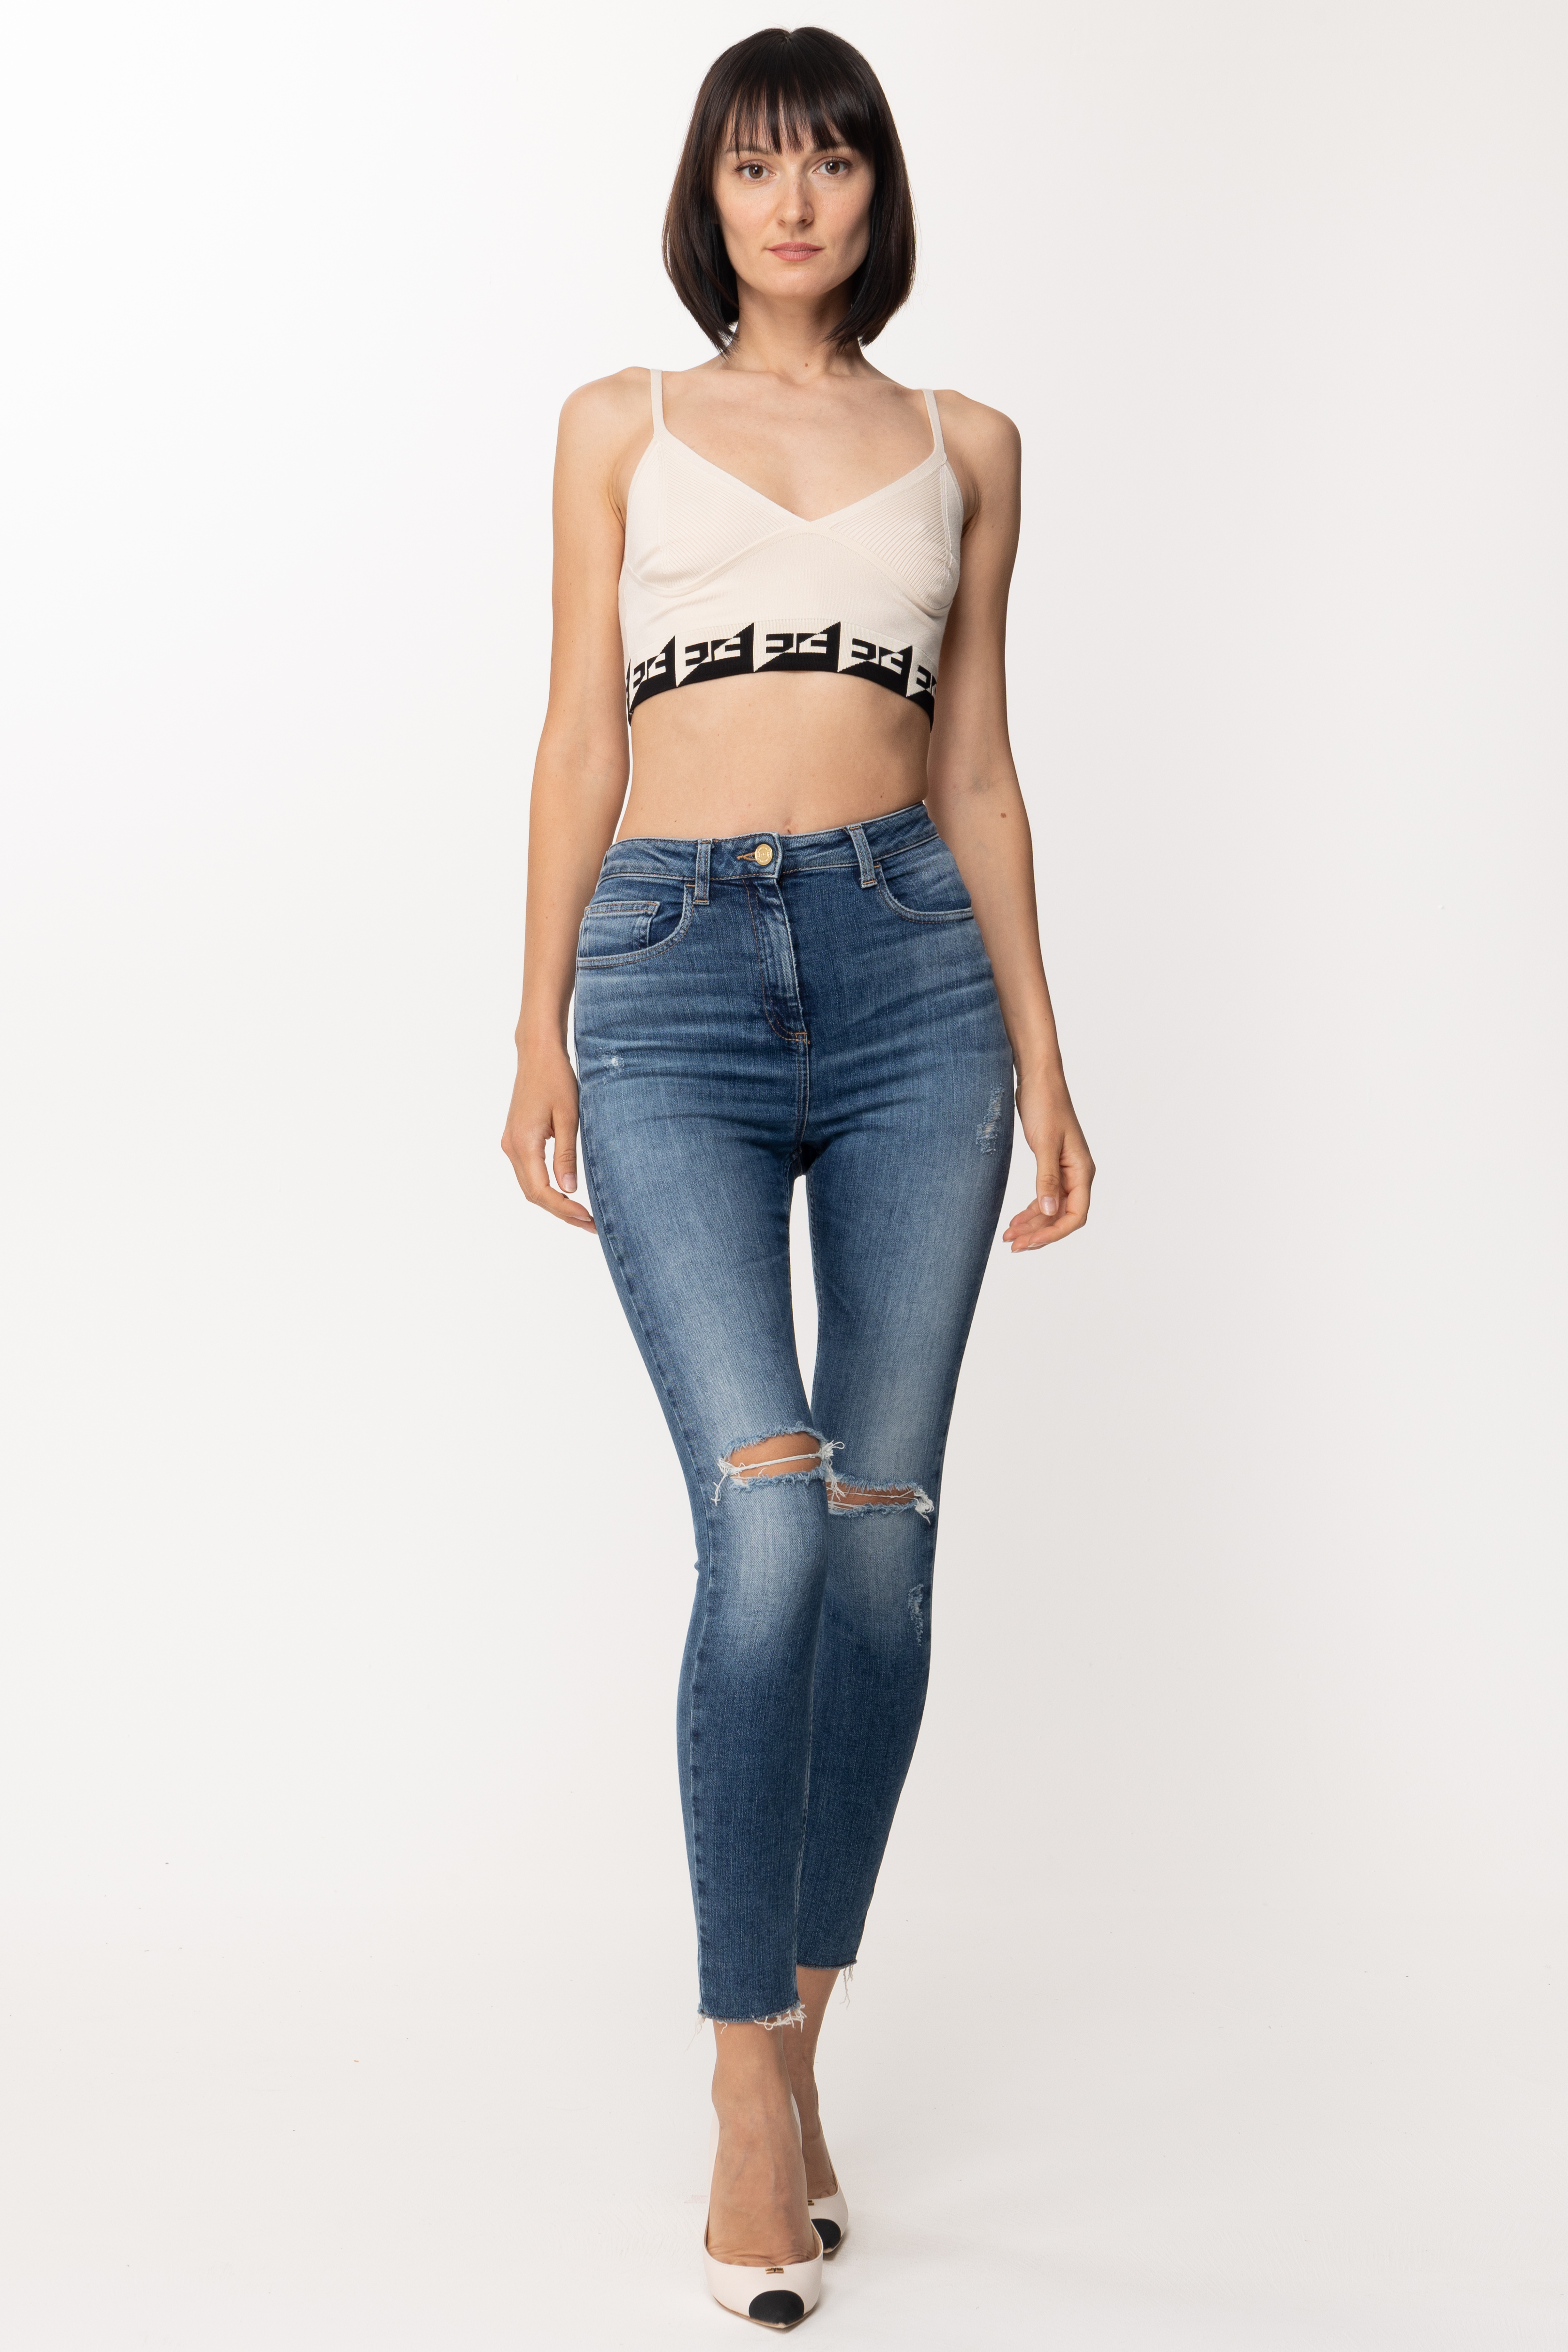 Preview: Elisabetta Franchi Crop top with logo band Burro